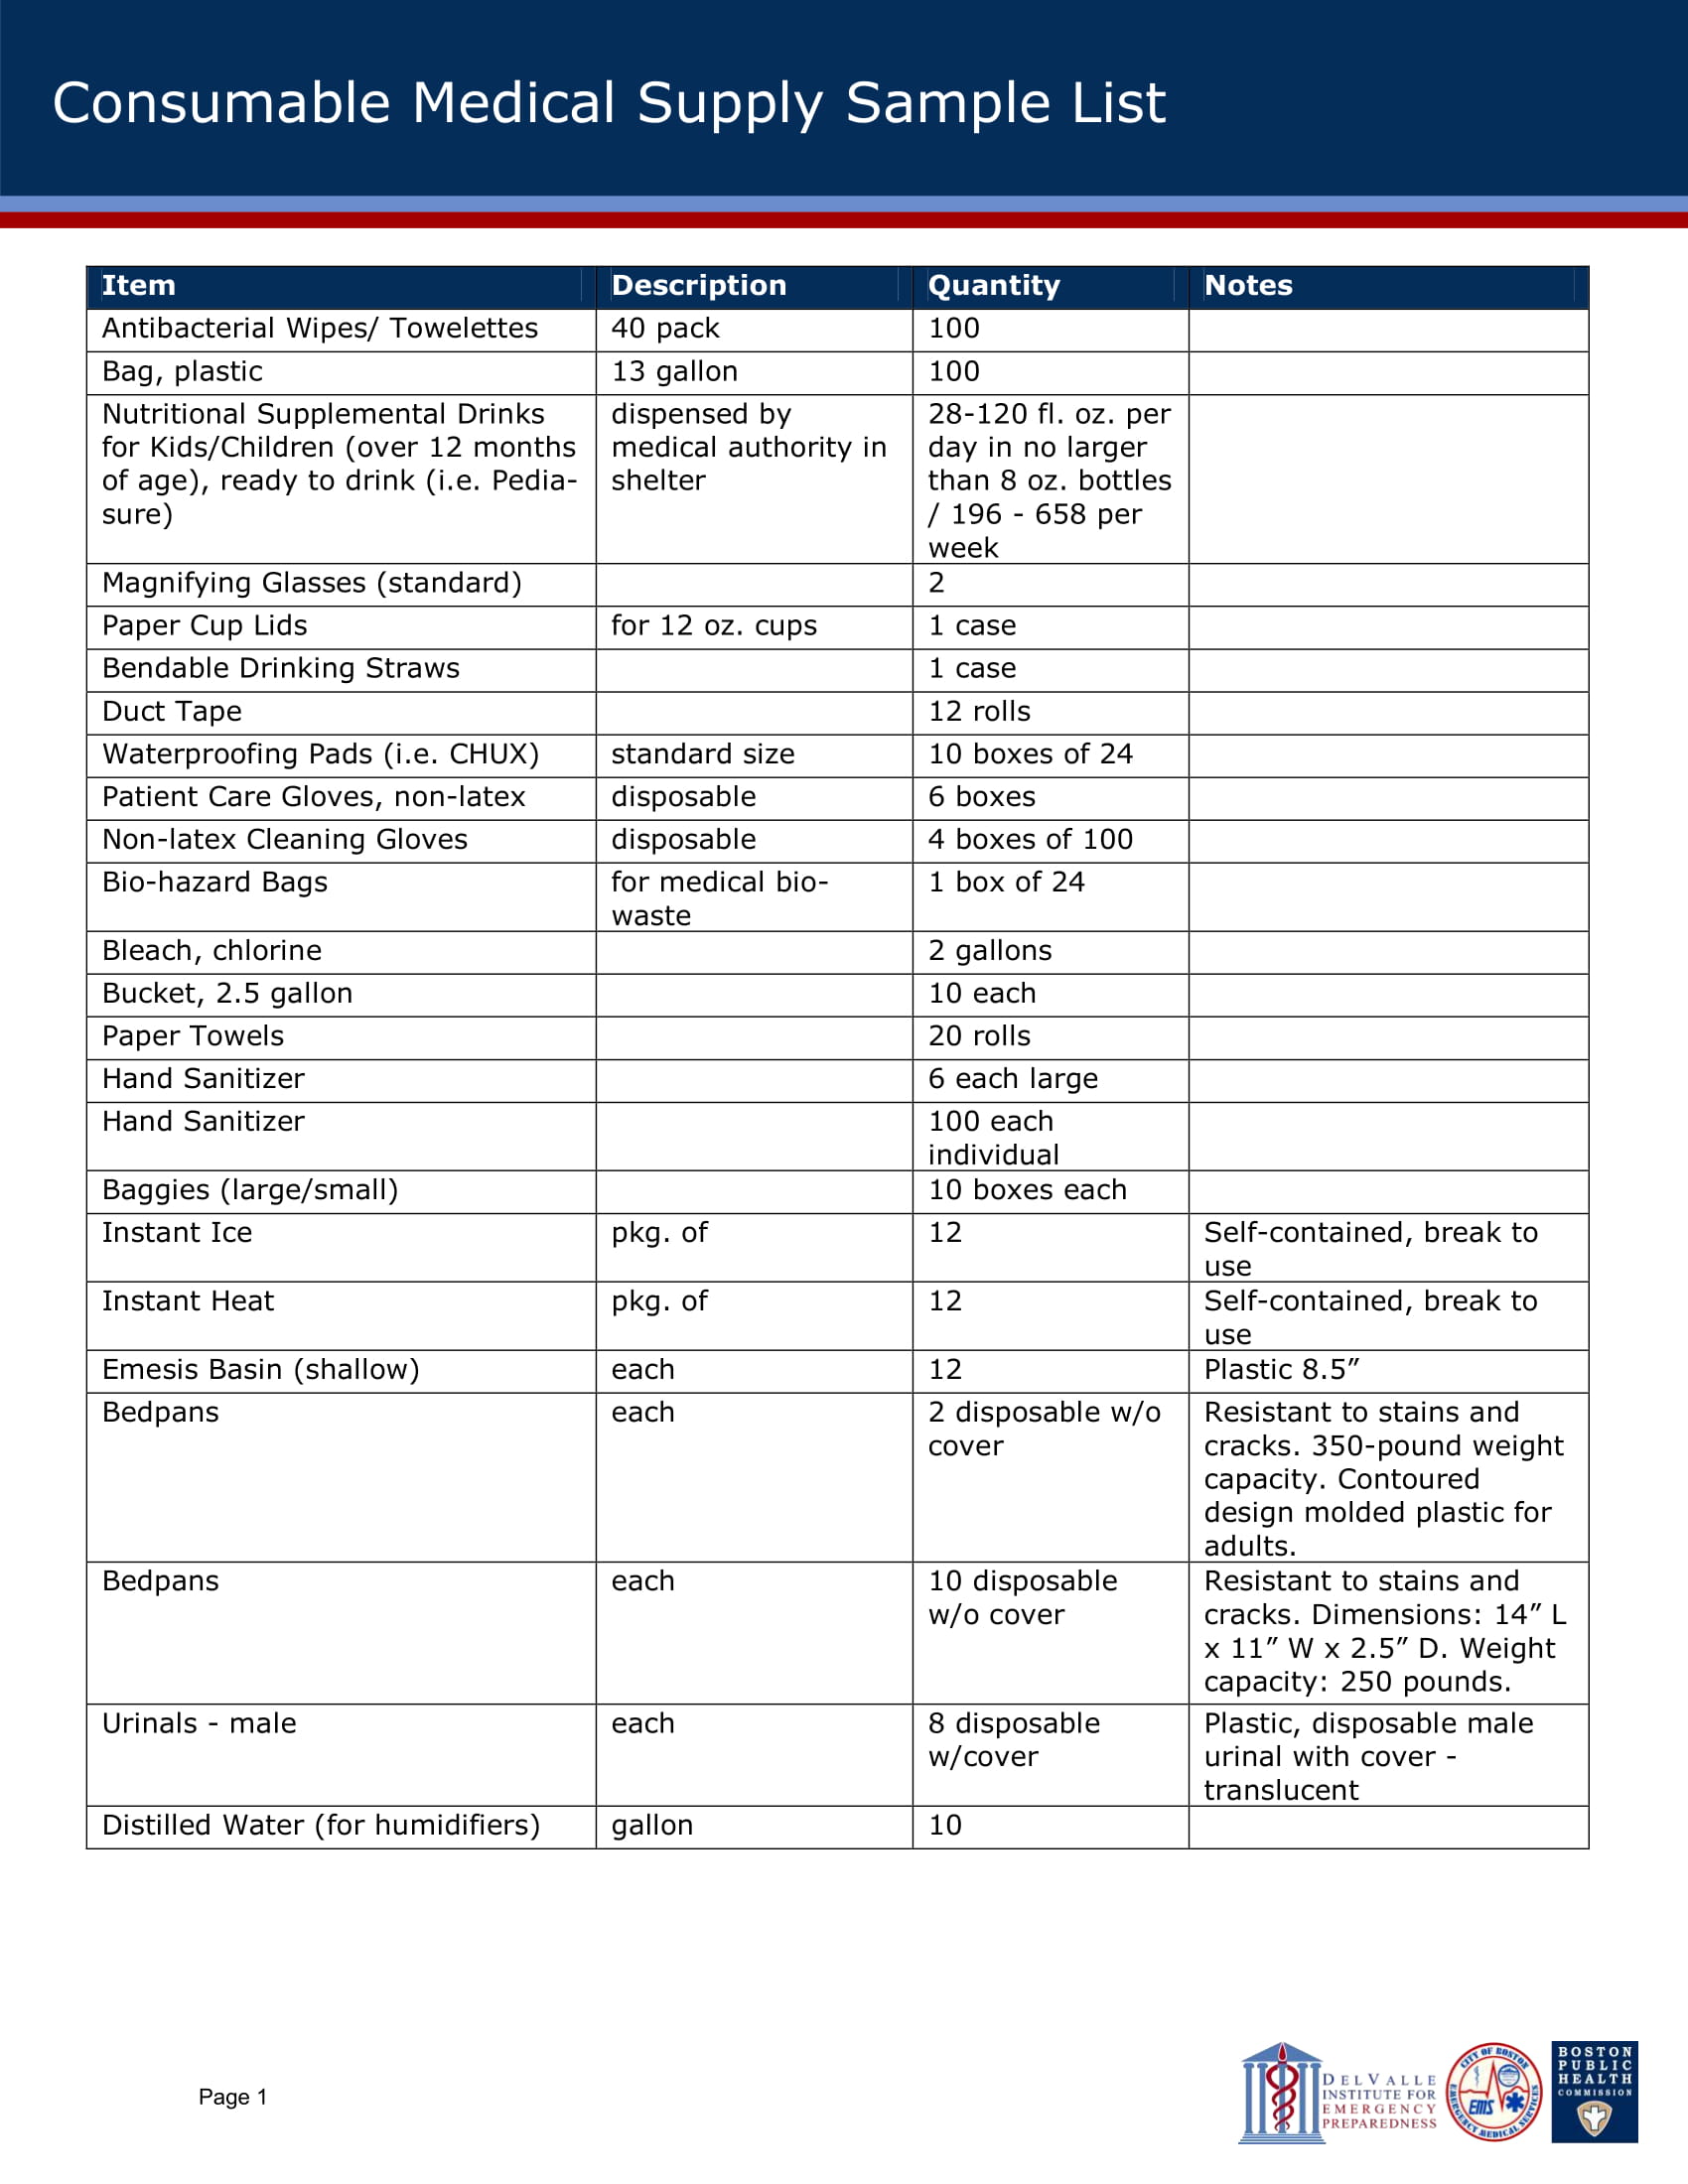 Consumable Medical Supply List Example 1